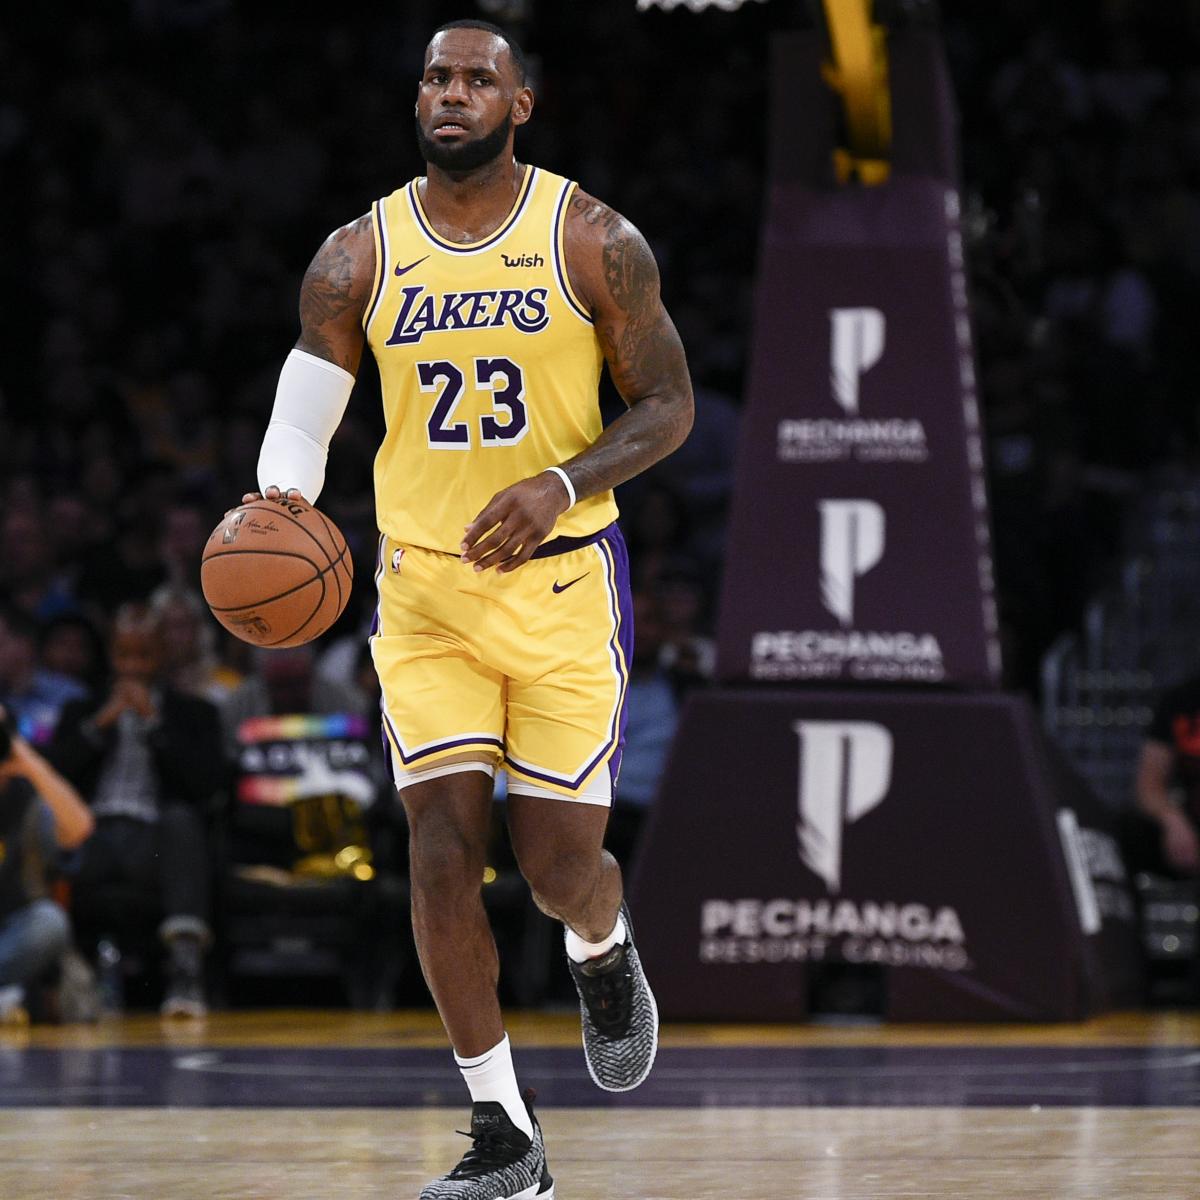 Lakers Lebron James Passes Andre Miller For 10th On Nba All Time Assist List Bleacher Report Latest News Videos And Highlights